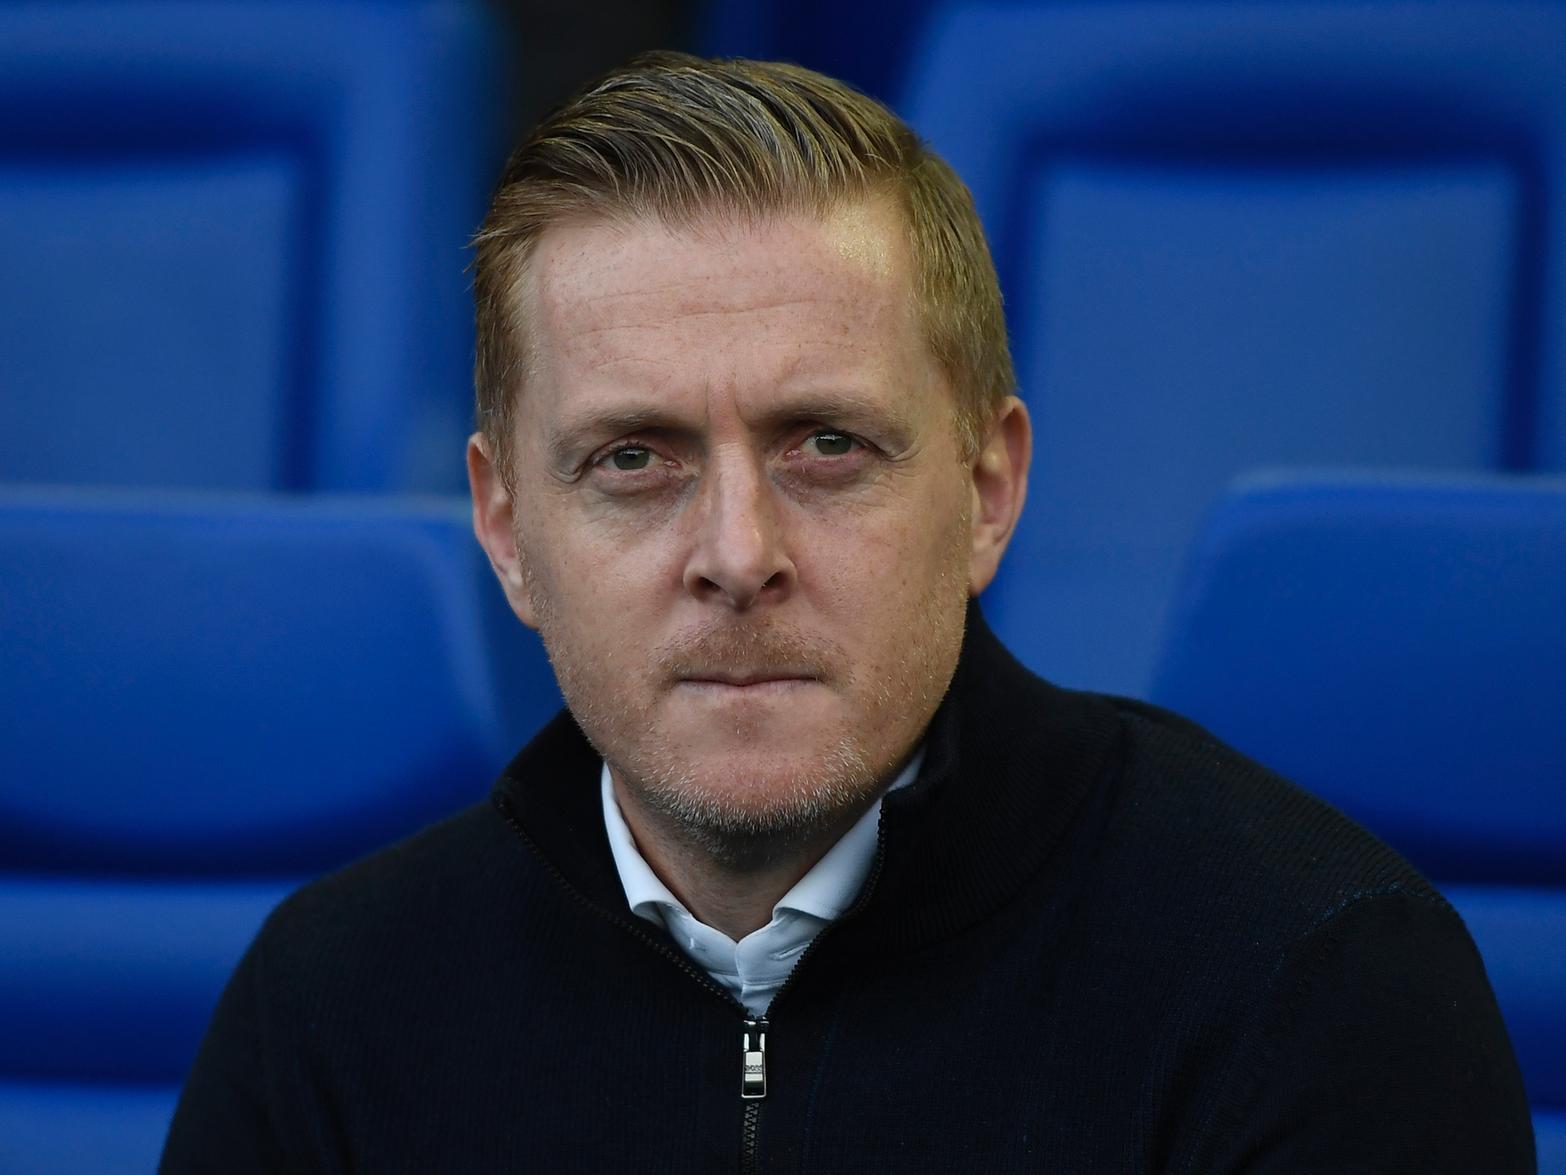 Sheffield Wednesday boss Garry Monk branded Cardiff City player Junior Hoilett's tackle on Liam Palmer on Sunday as 'reckless', and questioned why the player wasn't sent off for the offence. (Sheffield Star)